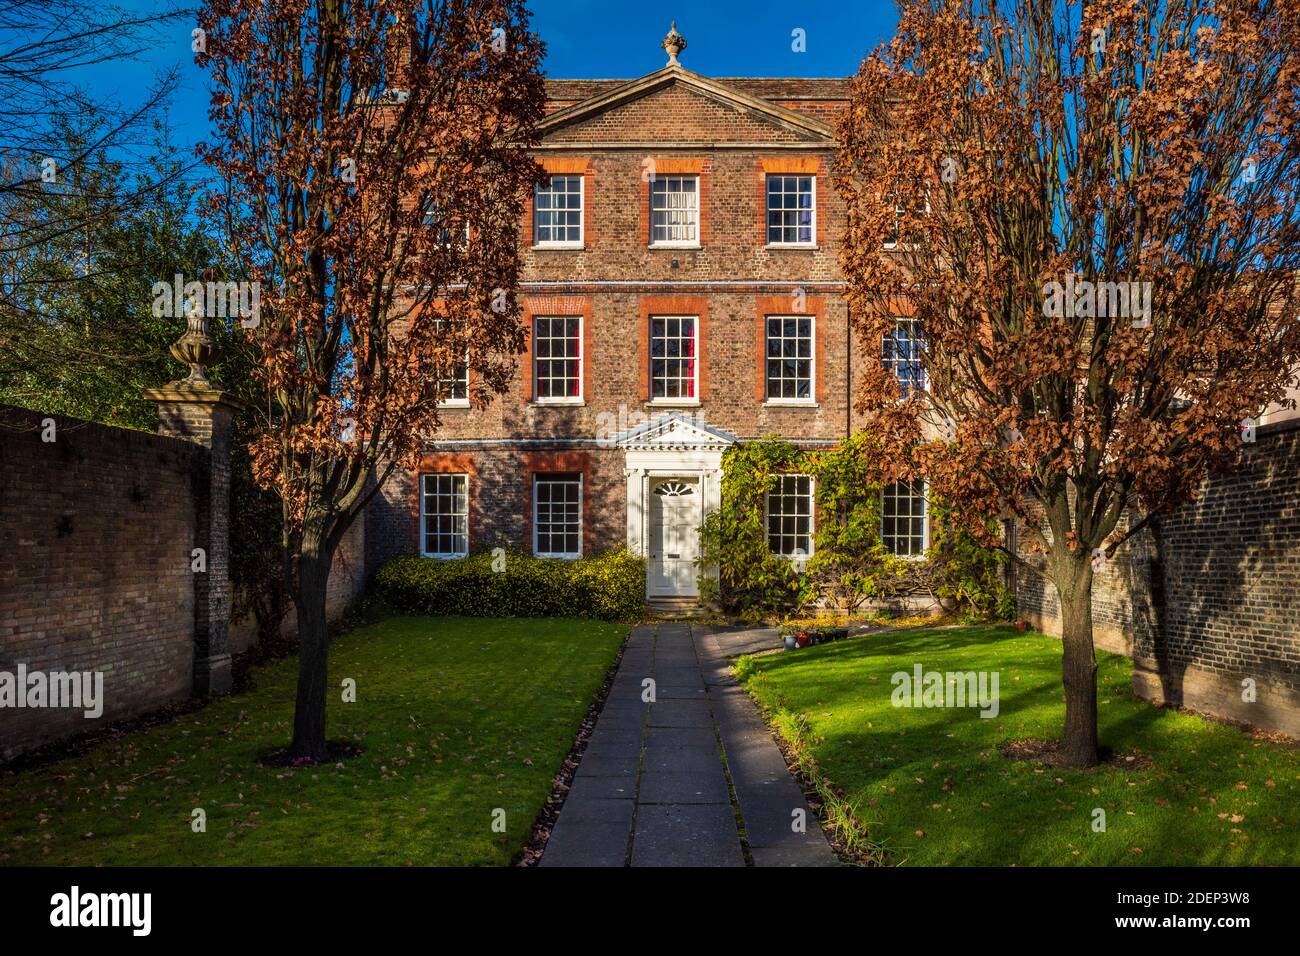 Little Trinity House Cambridge - dating from 1725, Grade I listed C18th domestic house, now used as student accommodation. Stock Photo